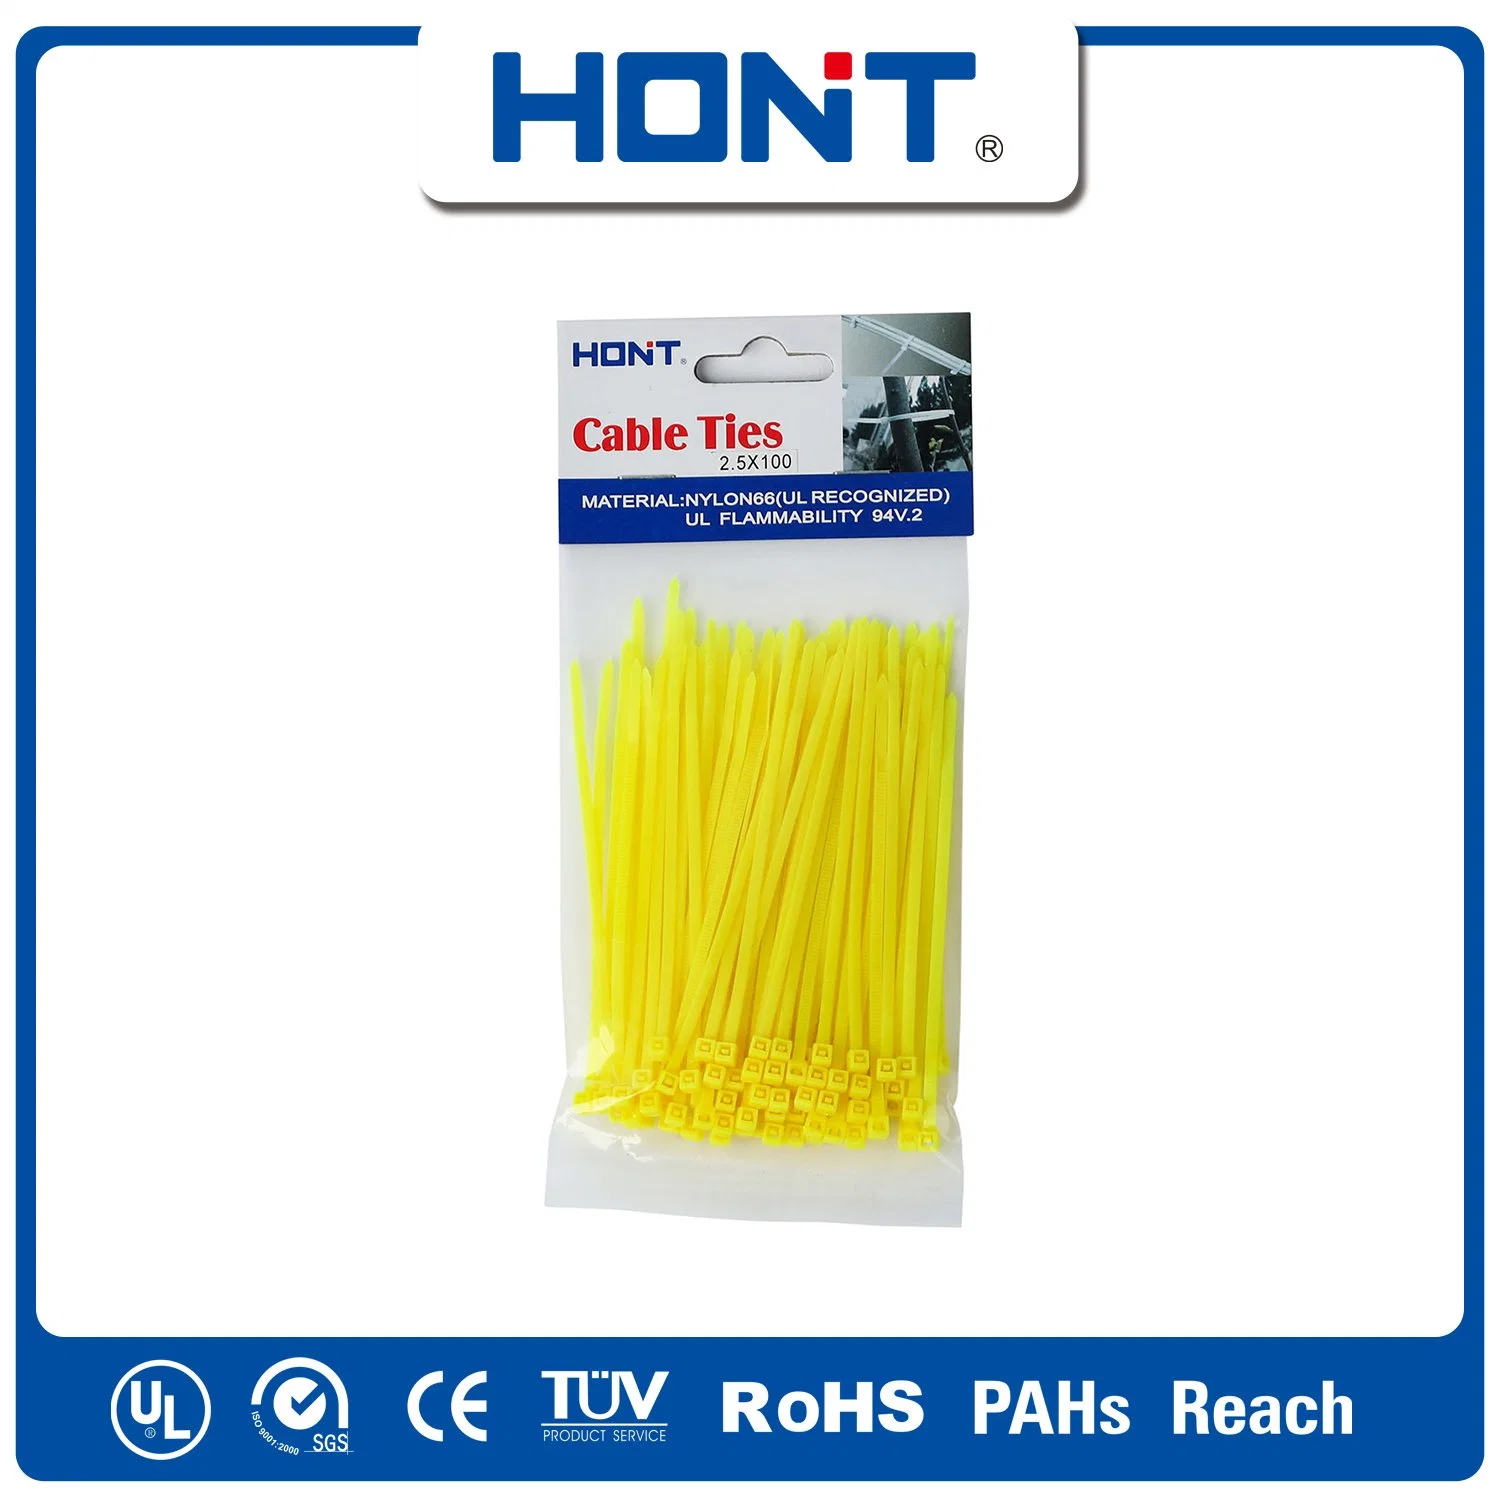 ISO Approved Self-Locking Tie Hont Plastic Bag + Sticker Exporting Carton/Tray Nylon Cable Accessories